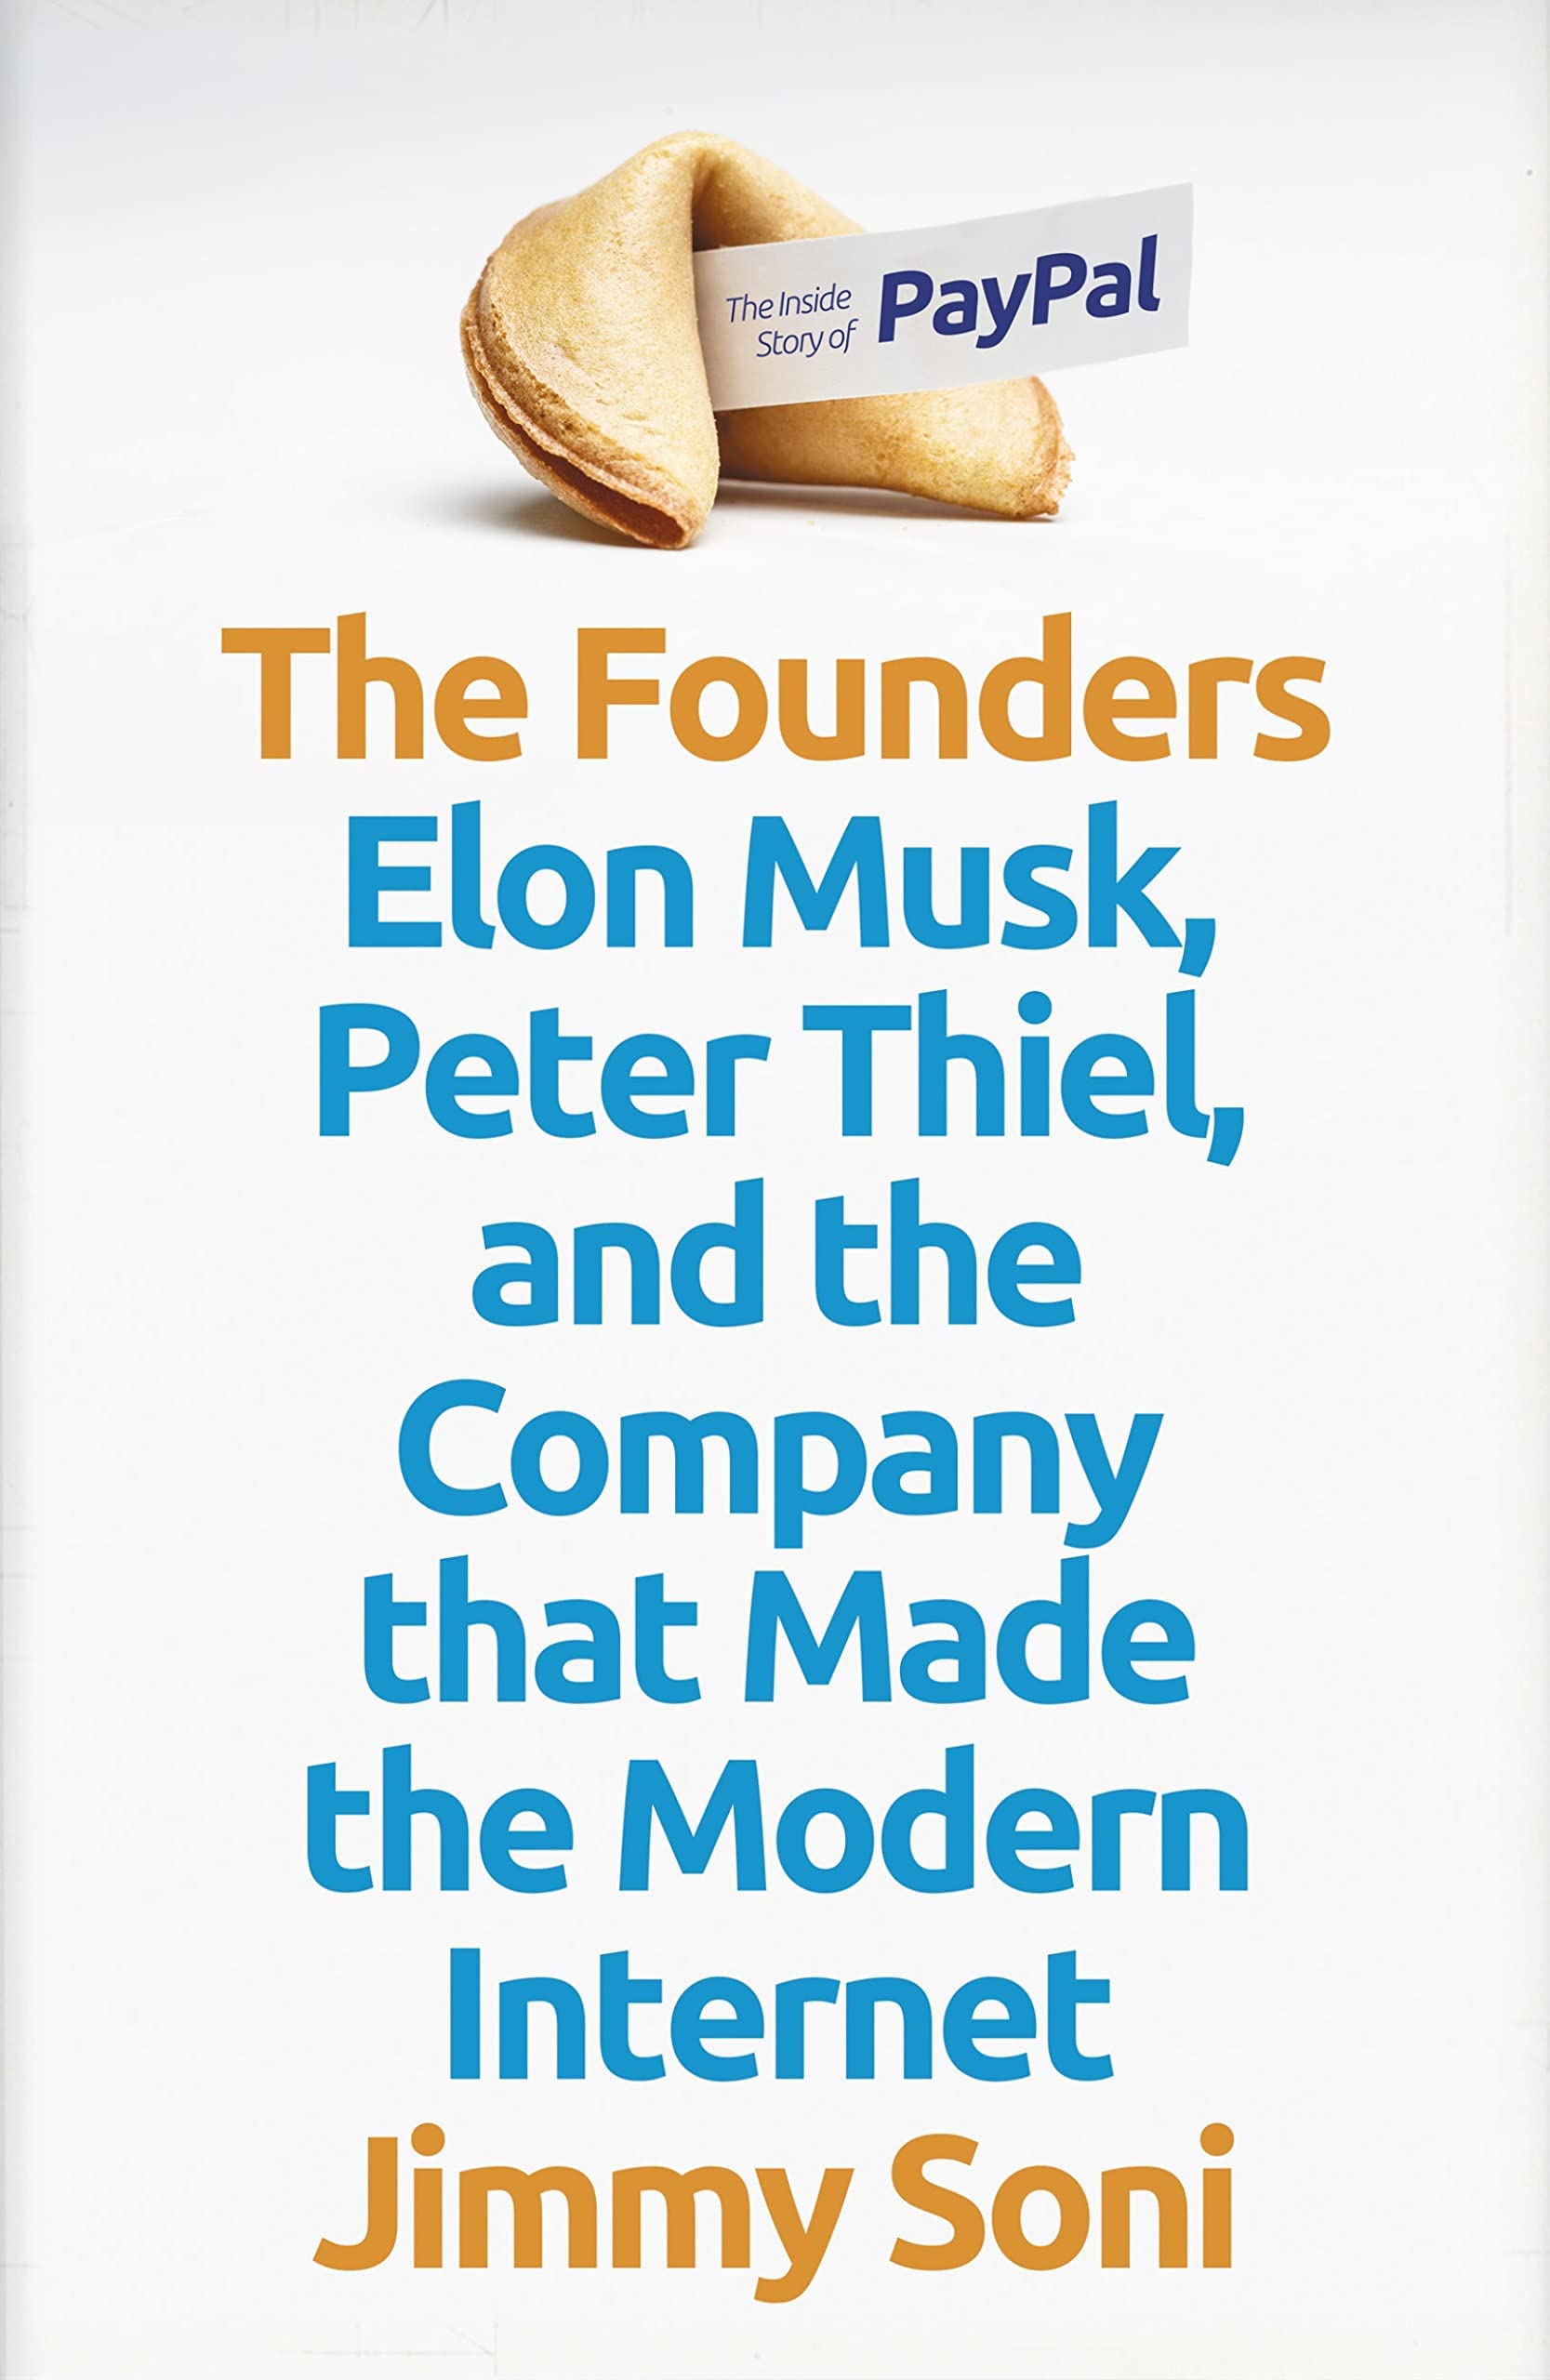  The Founders : Elon Musk, Peter Thiel and the Company that Made - 9781786498298 - Atlantic Books